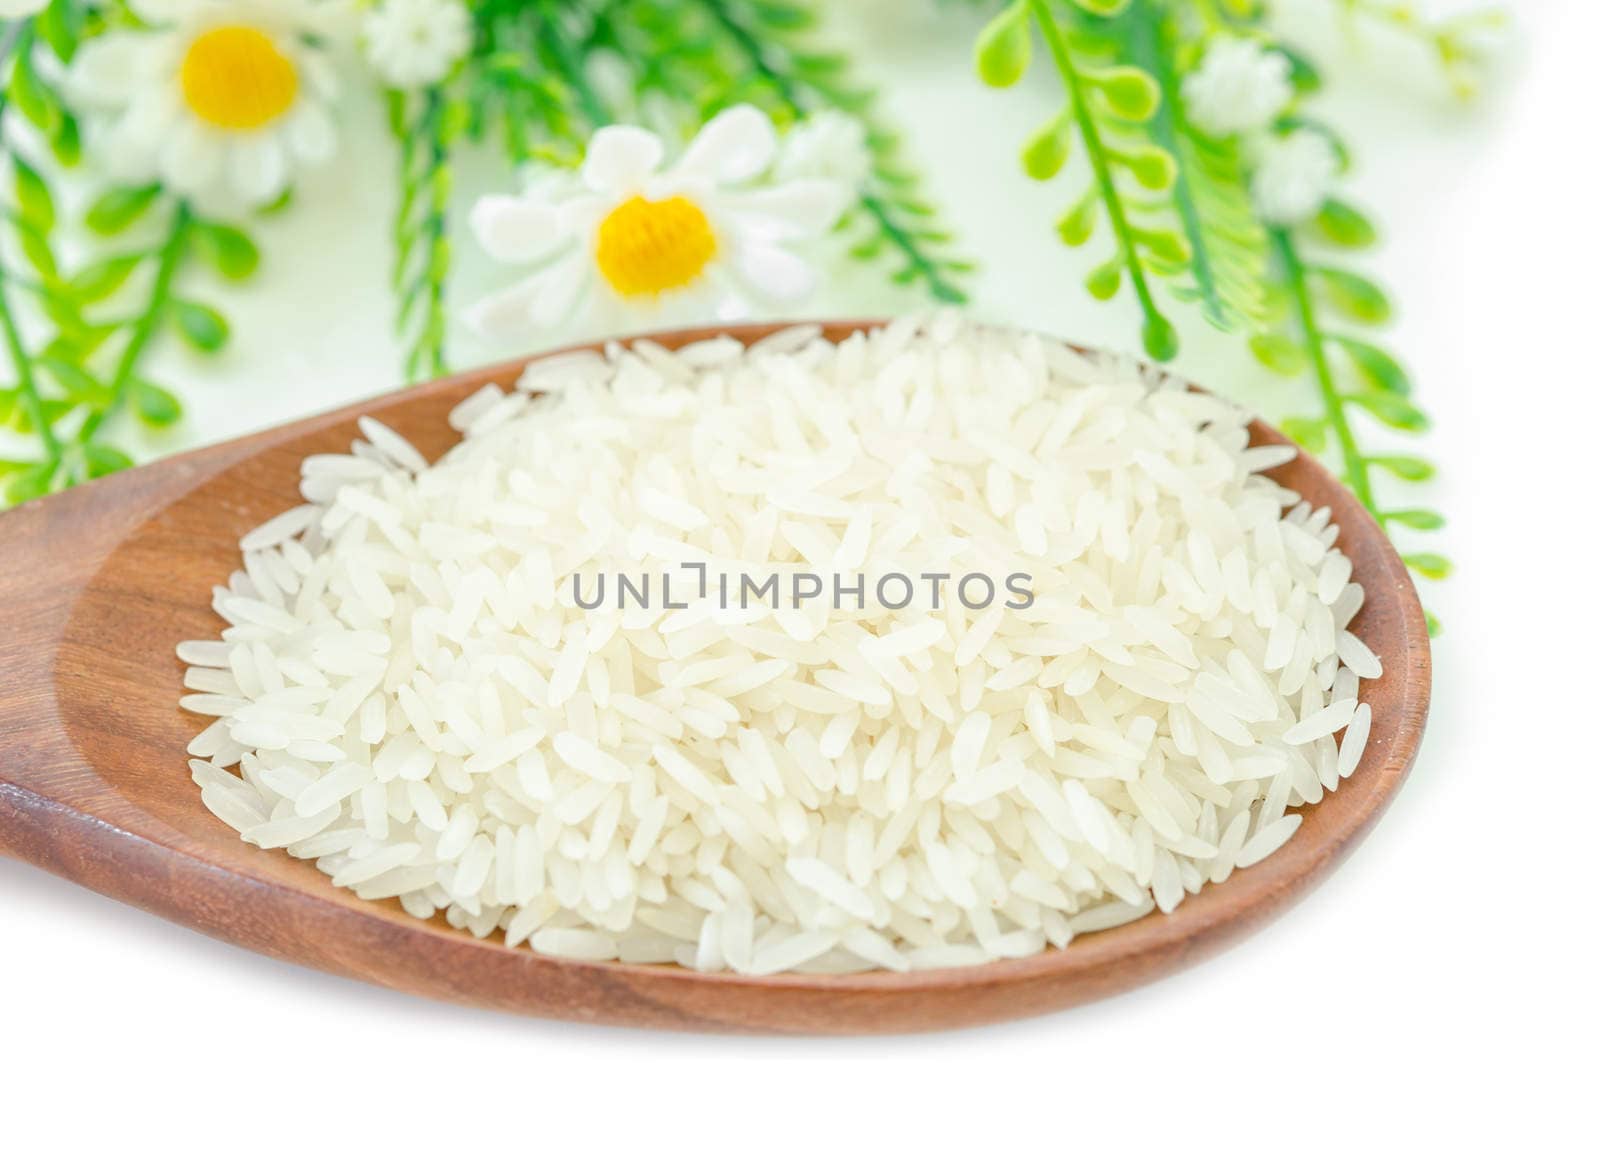 Jasmine rice in wooden spoon and white flower on white background.